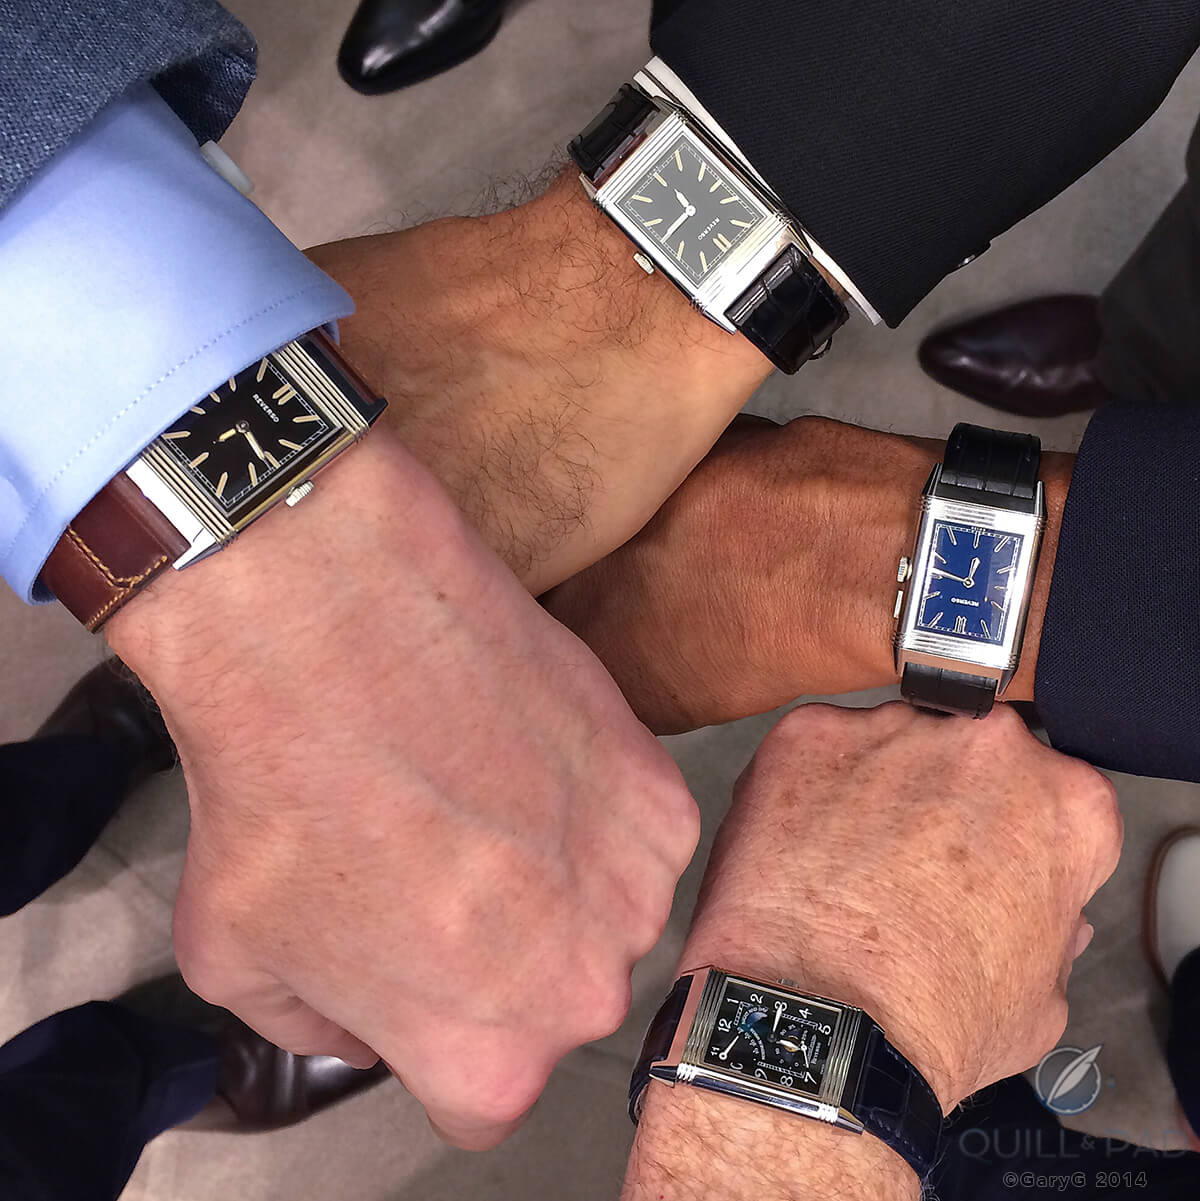 Collectors meet: Reversos all around at a watch gathering